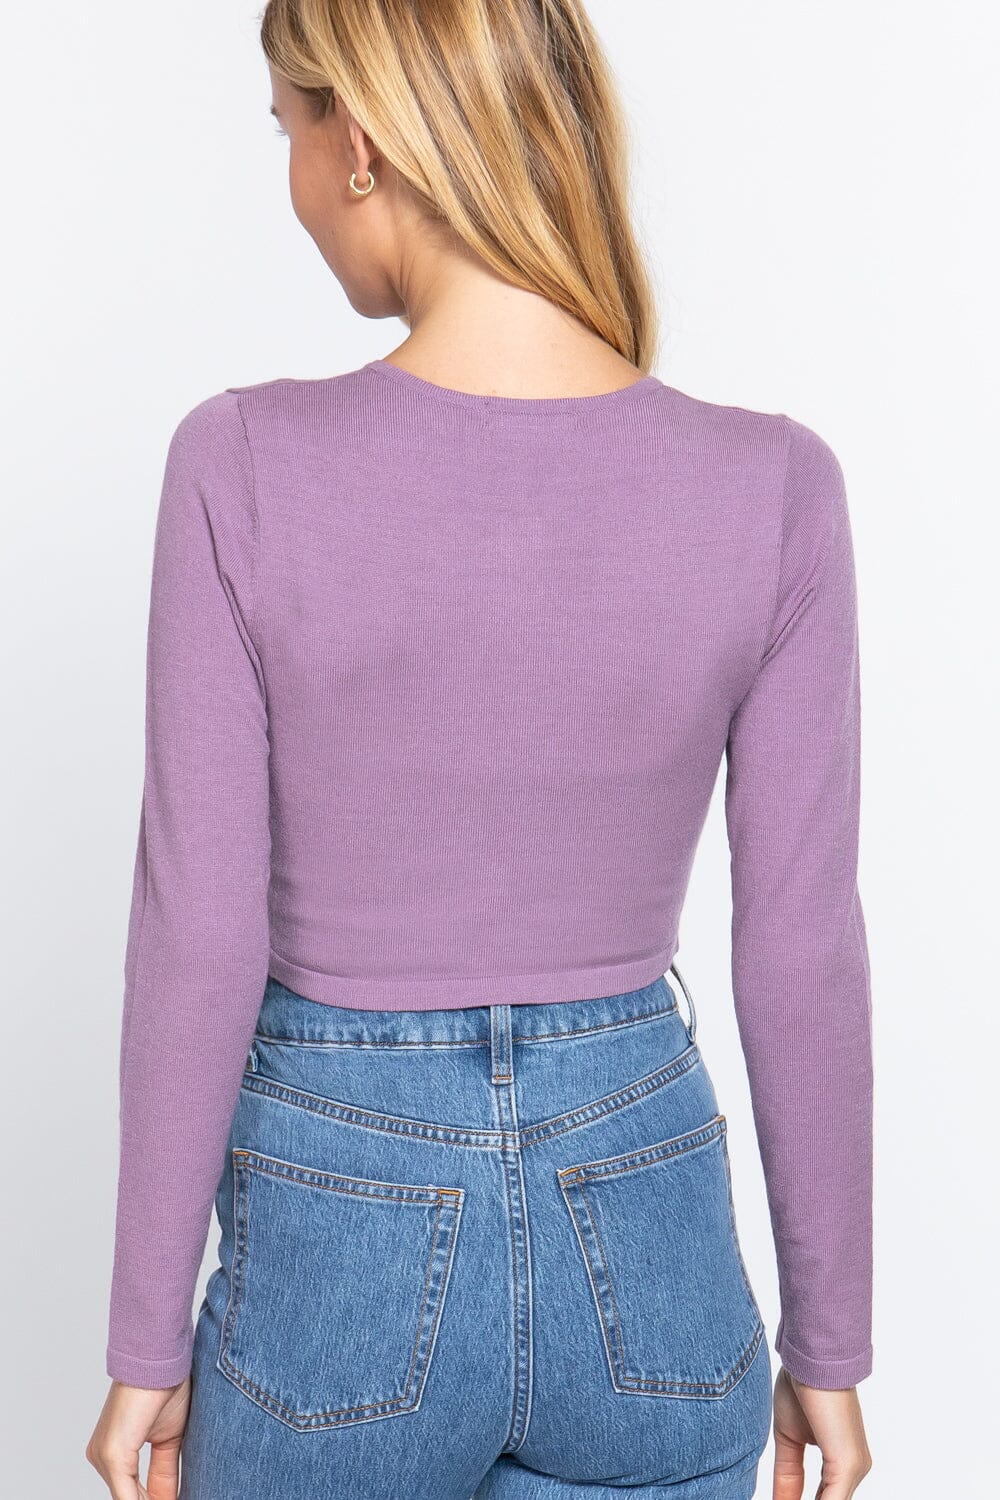 Misty Lavender Purple Button Down Round Neck Long Sleeve Cropped Cardigan Sweaters Shirts & Tops jehouze 